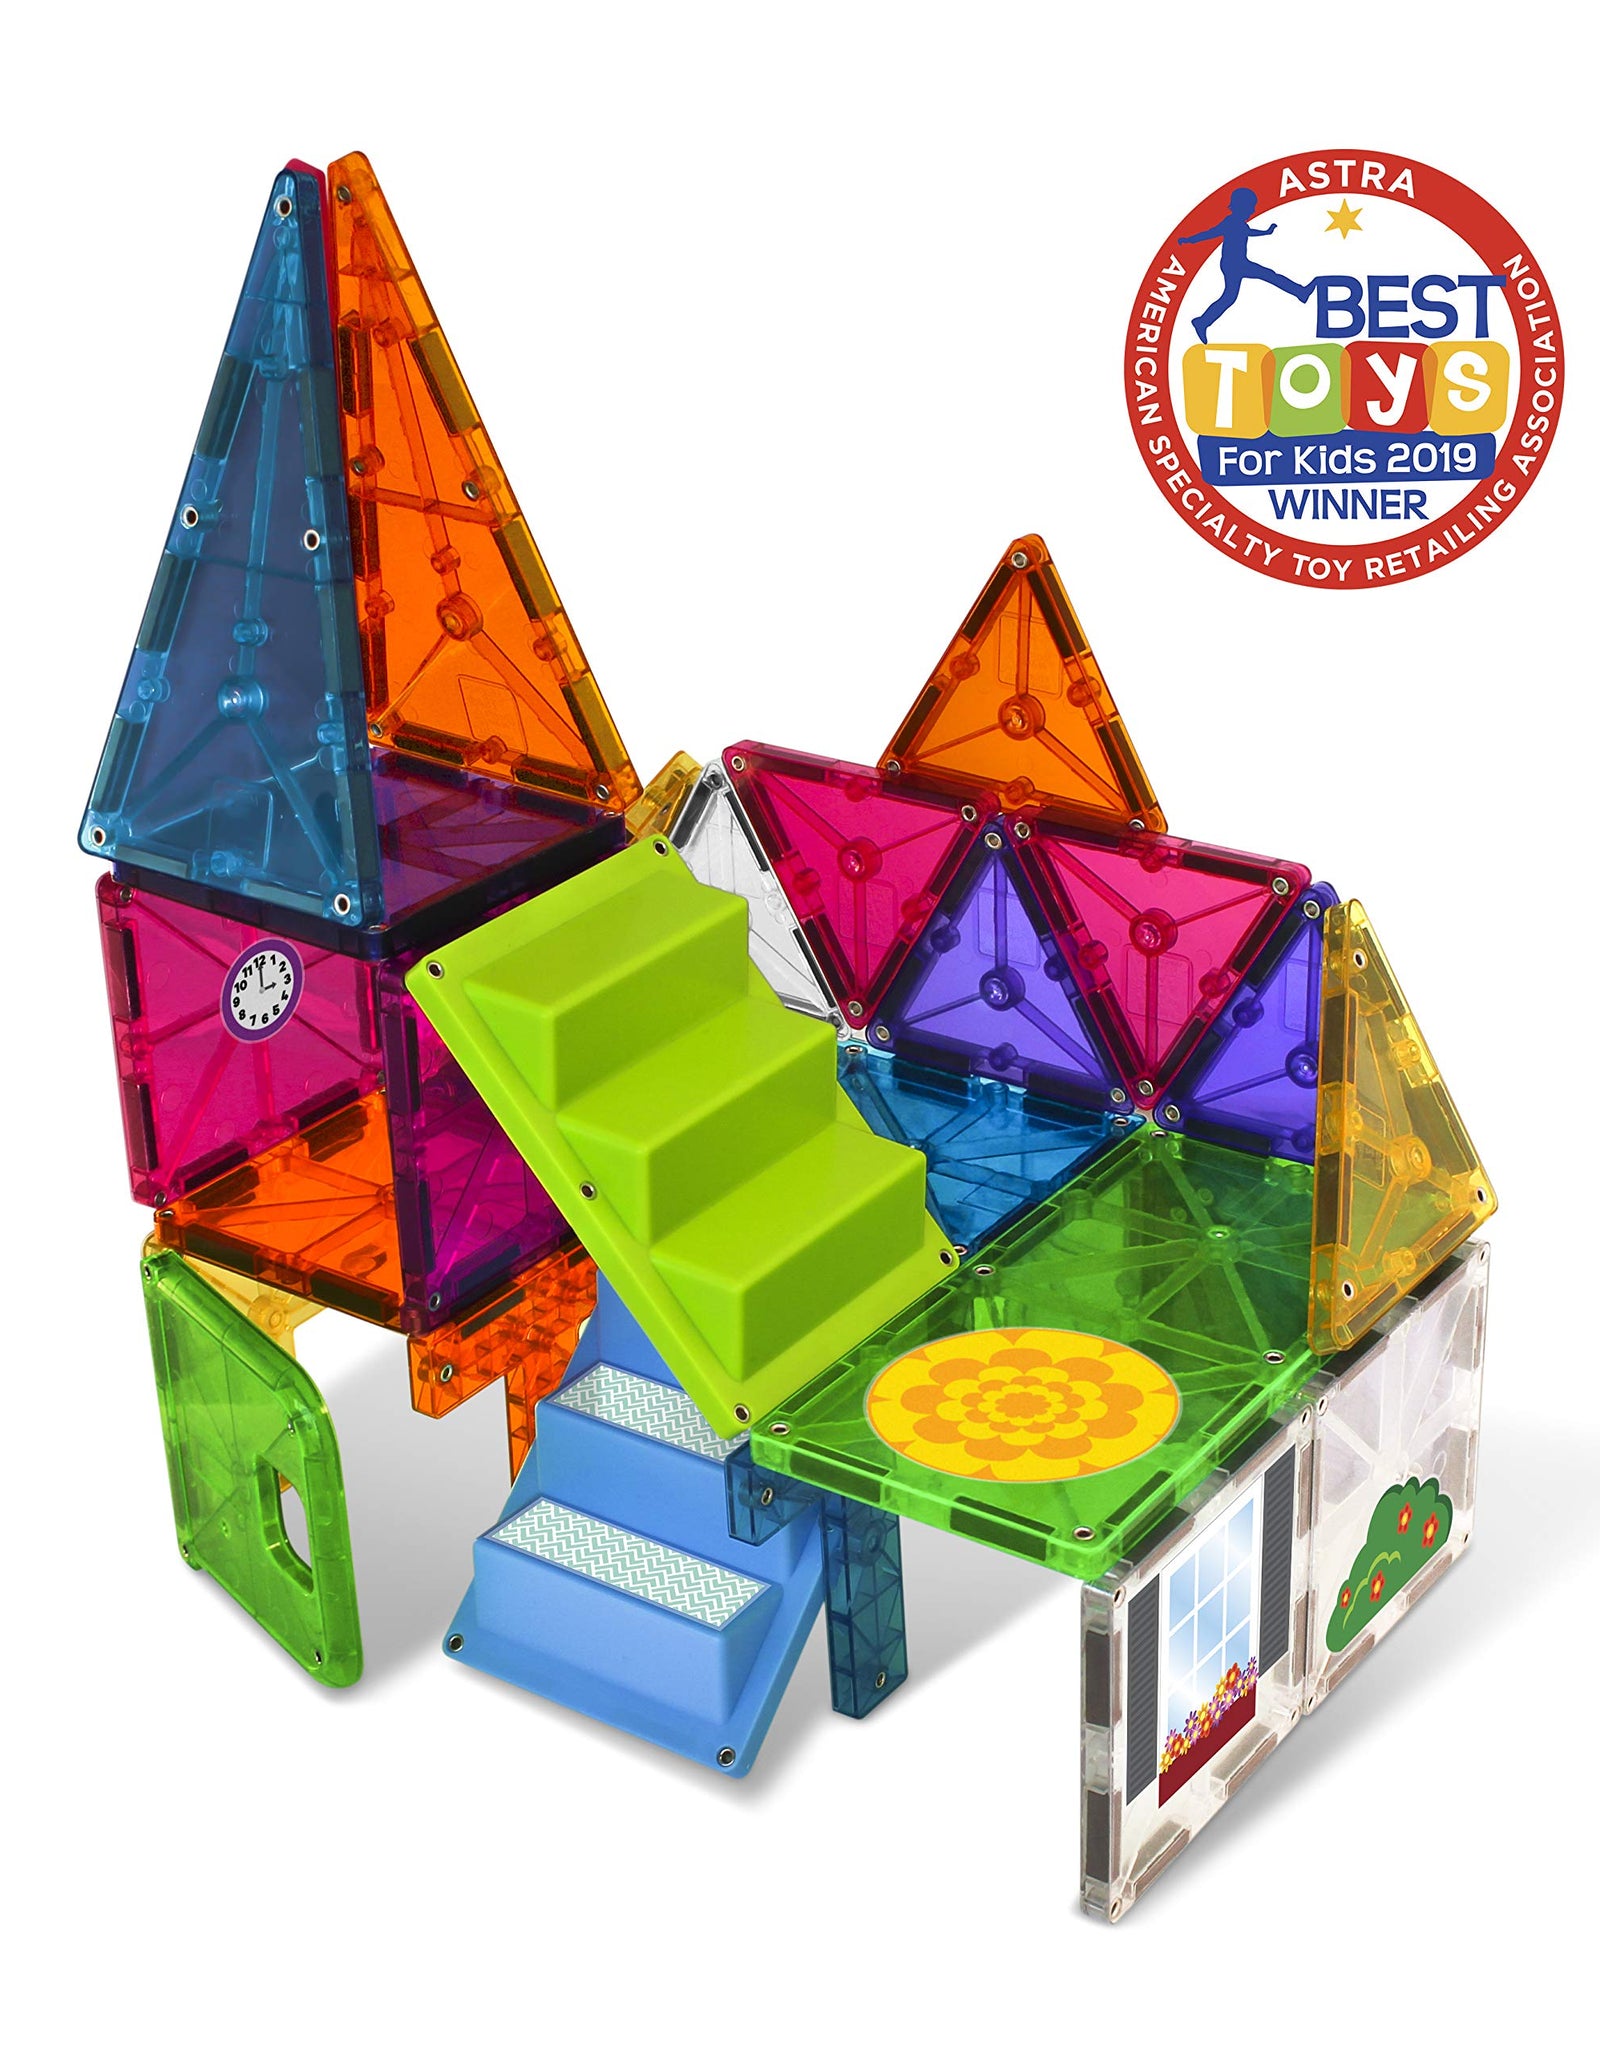 Magna-Tiles House Set, The Original Magnetic Building Tiles For Creative Open-Ended Play, Educational Toys For Children Ages 3 Years + (28 Pieces + Reusable Silicone Stickers)